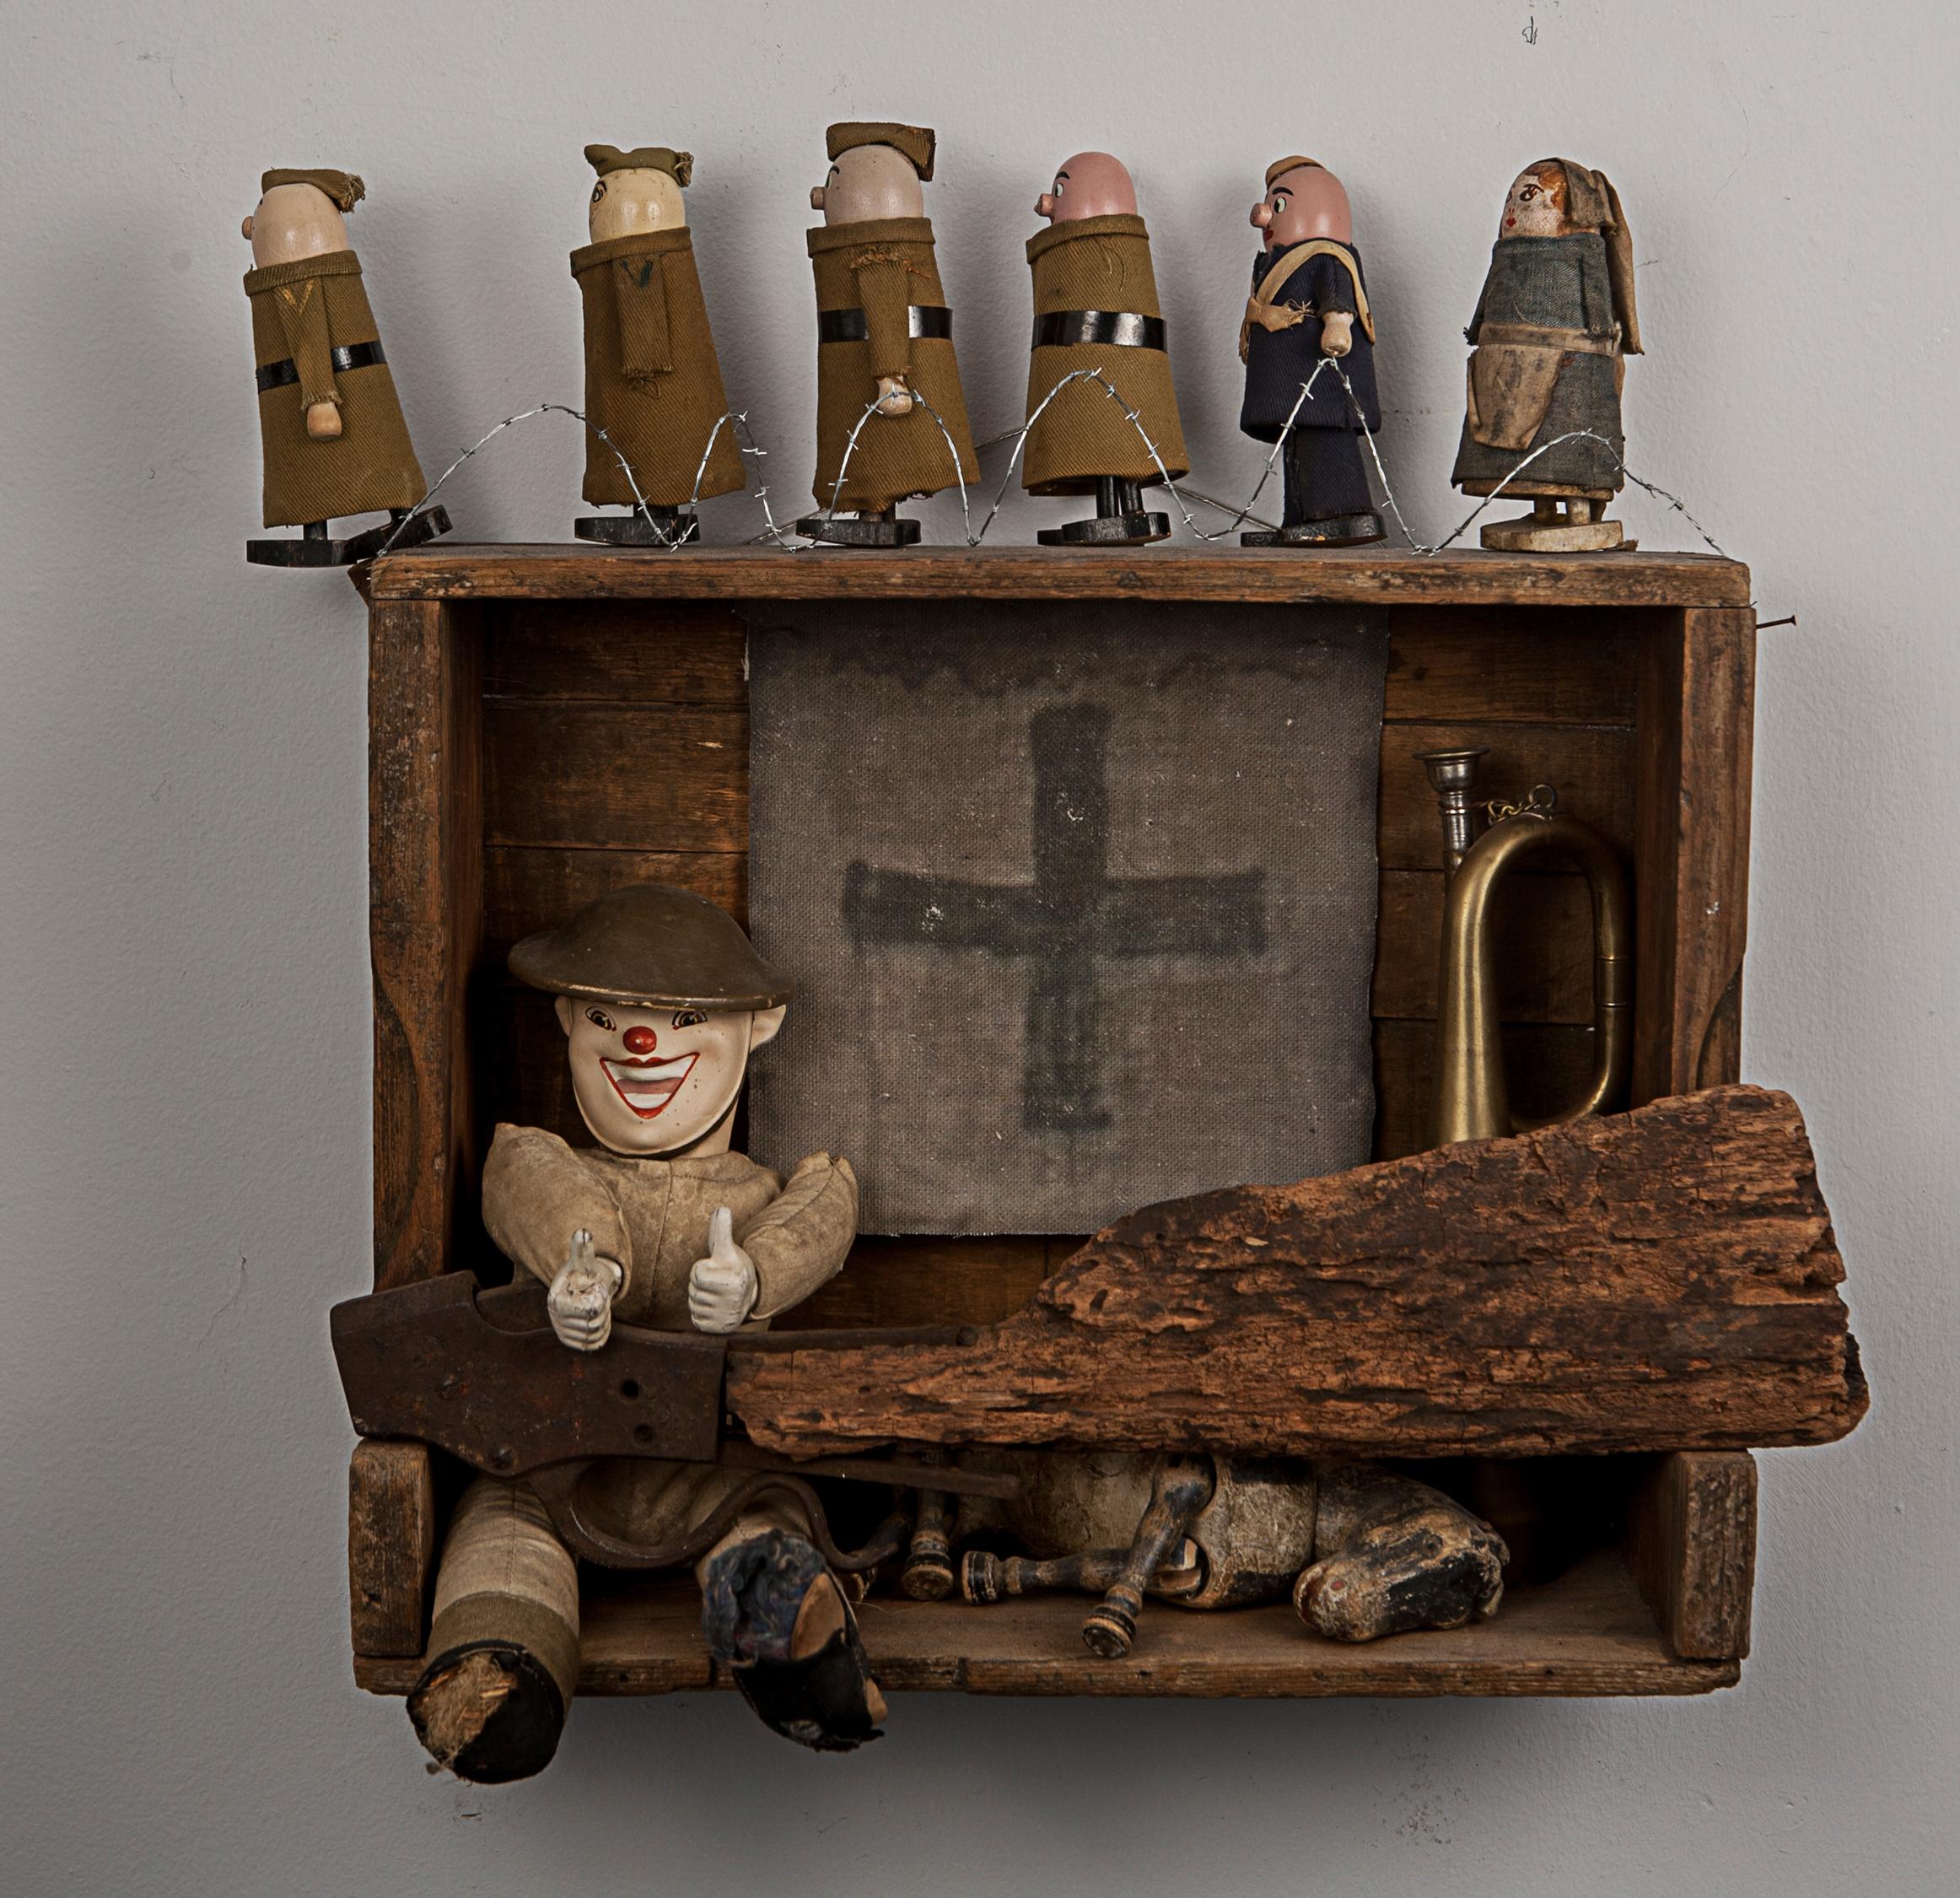 Home by Christmas – Sculpture von Kat Flyn